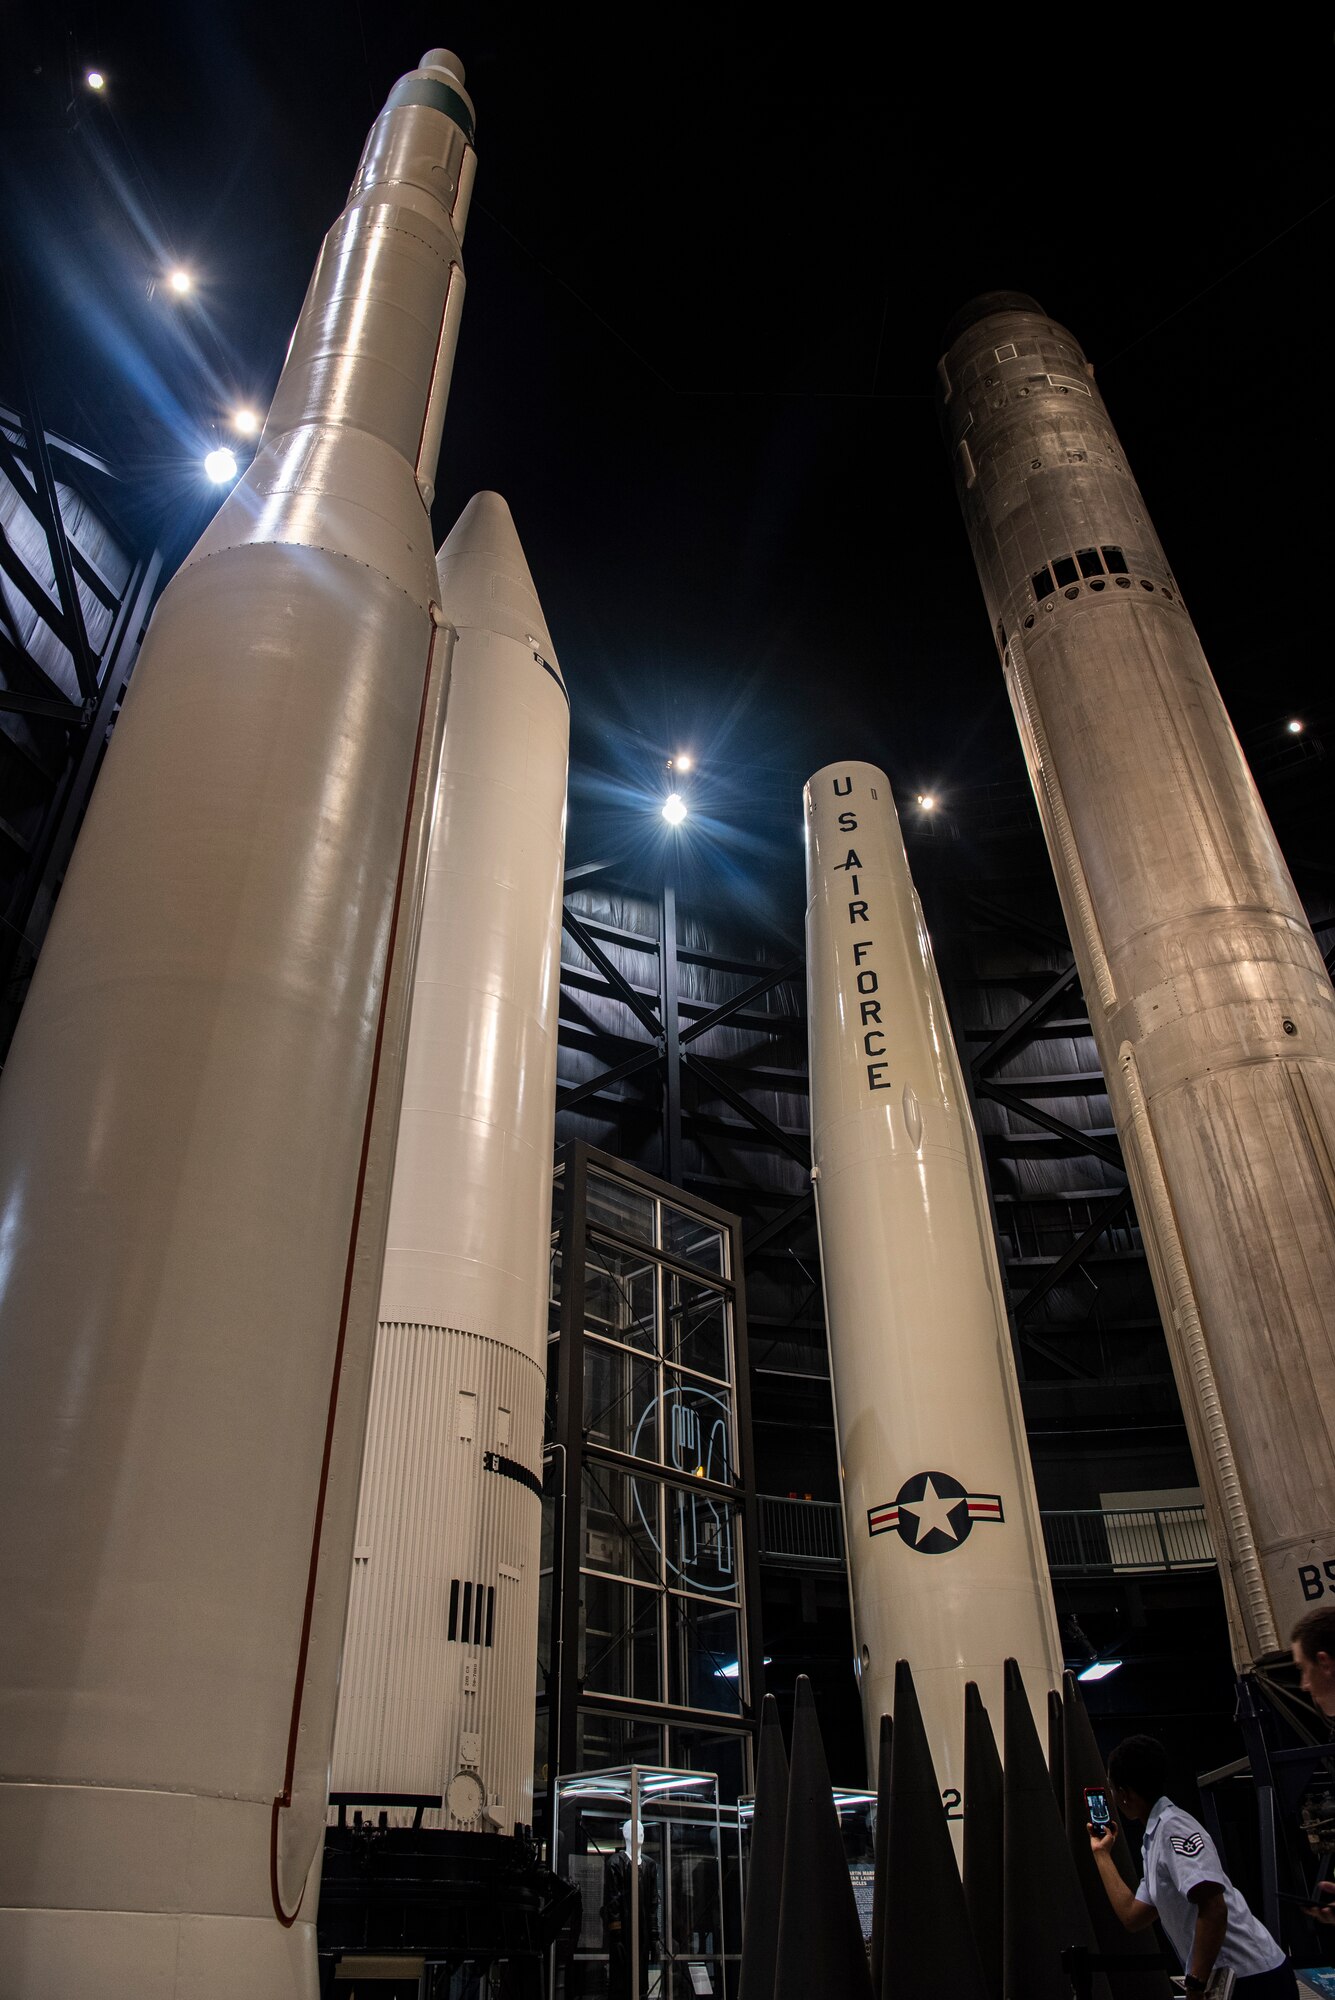 ICBM missiles sit on display at The National Museum of the U.S. Air Force Sept. 4, 2019, at Wright-Patterson Air Force Base, Ohio. Airmen from F.E. Warren Air Force Base, Wyo., visited the museum to learn more about the heritage behind the ICBM mission. (U.S. Air Force photo by Senior Airmen Abbigayle Williams)